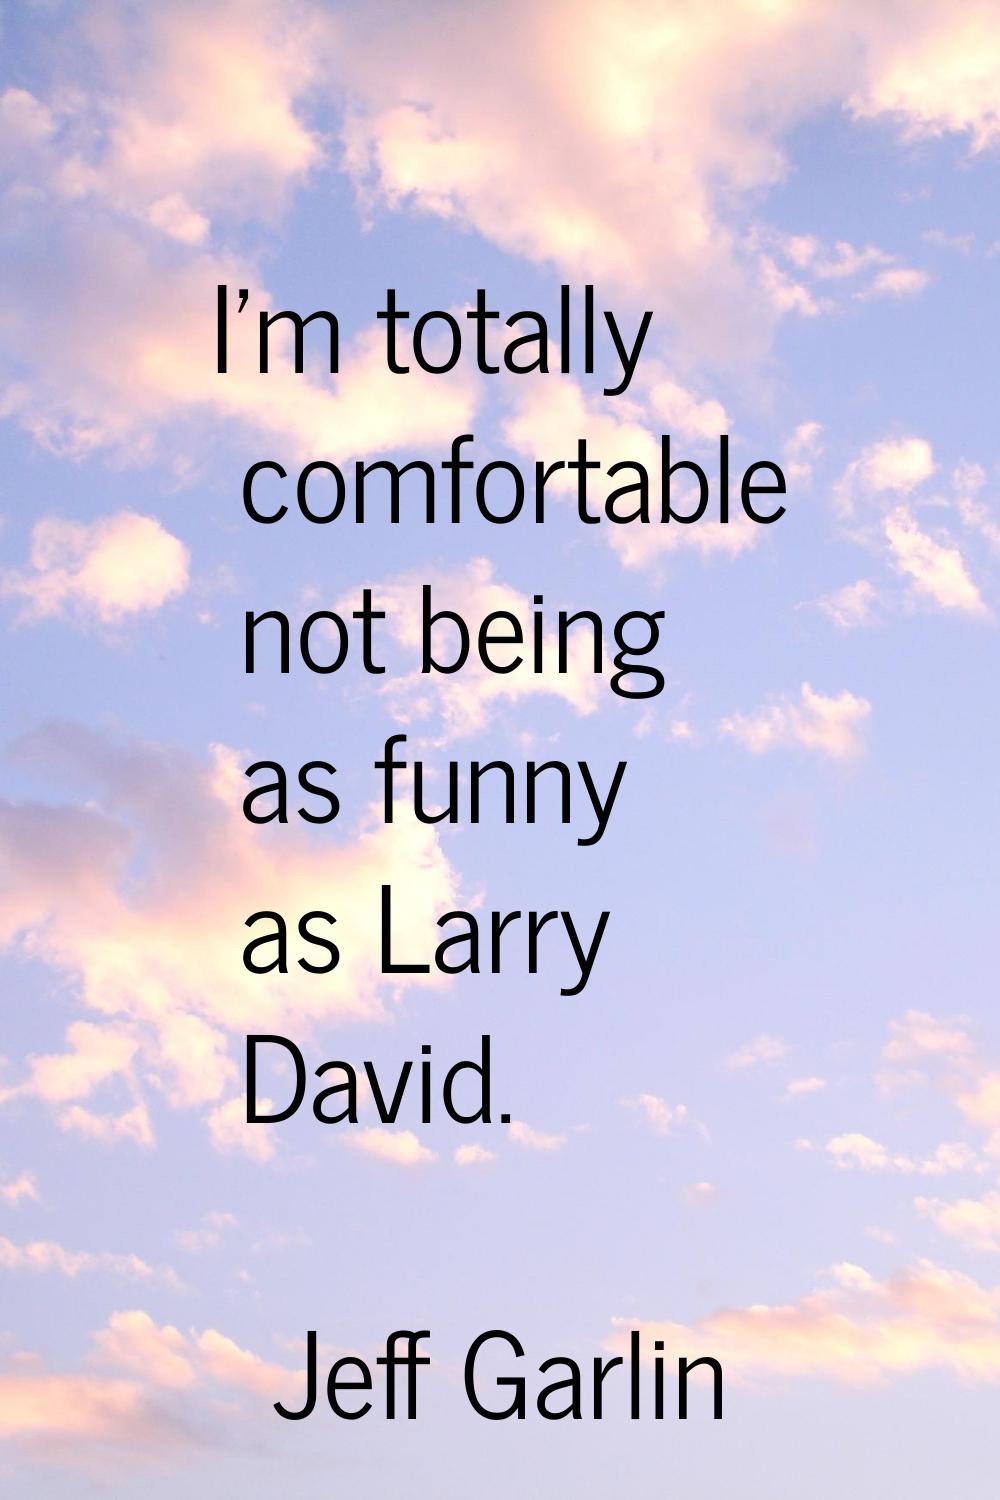 I'm totally comfortable not being as funny as Larry David.